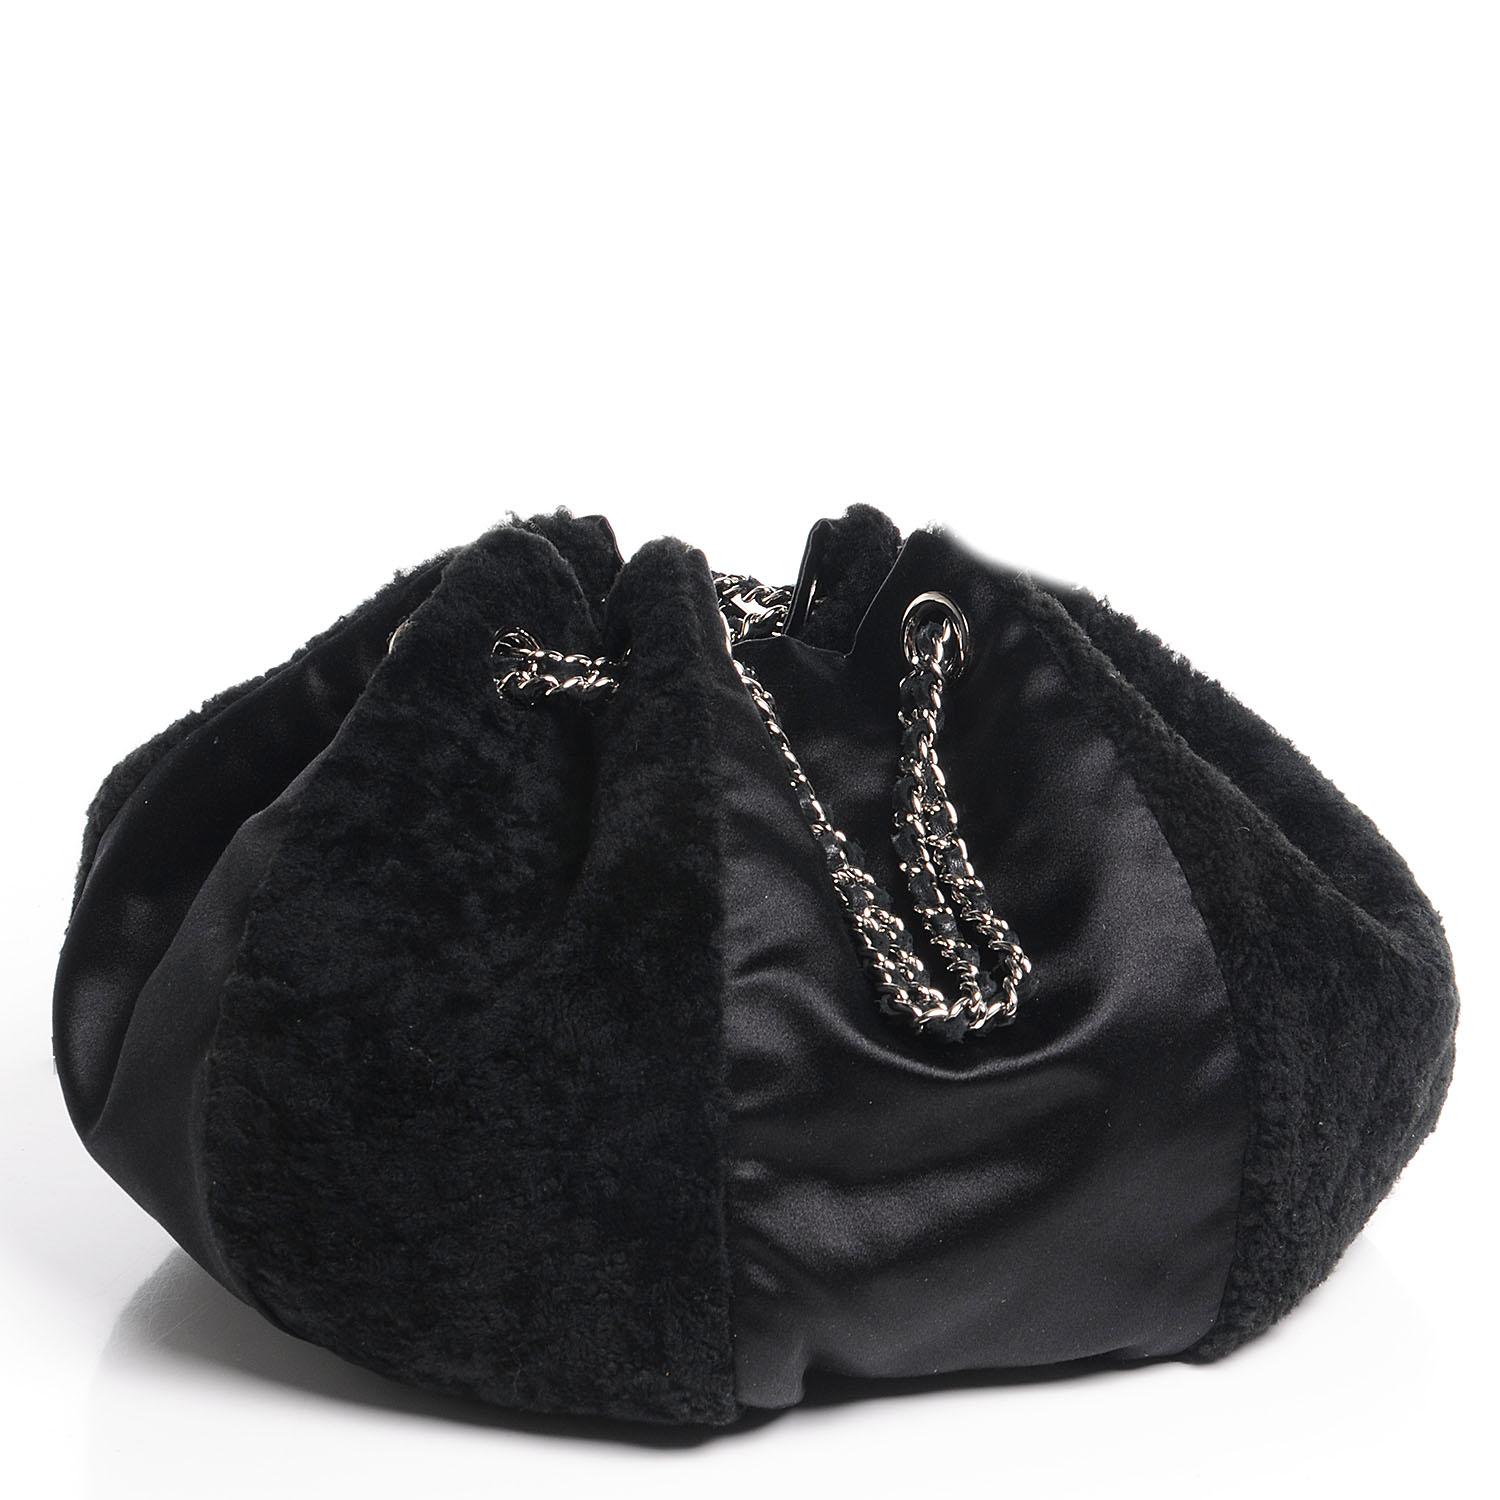 Chanel 2004 Vintage Black Shearling Satin Drawstring Tassel Bag  In Excellent Condition For Sale In Miami, FL